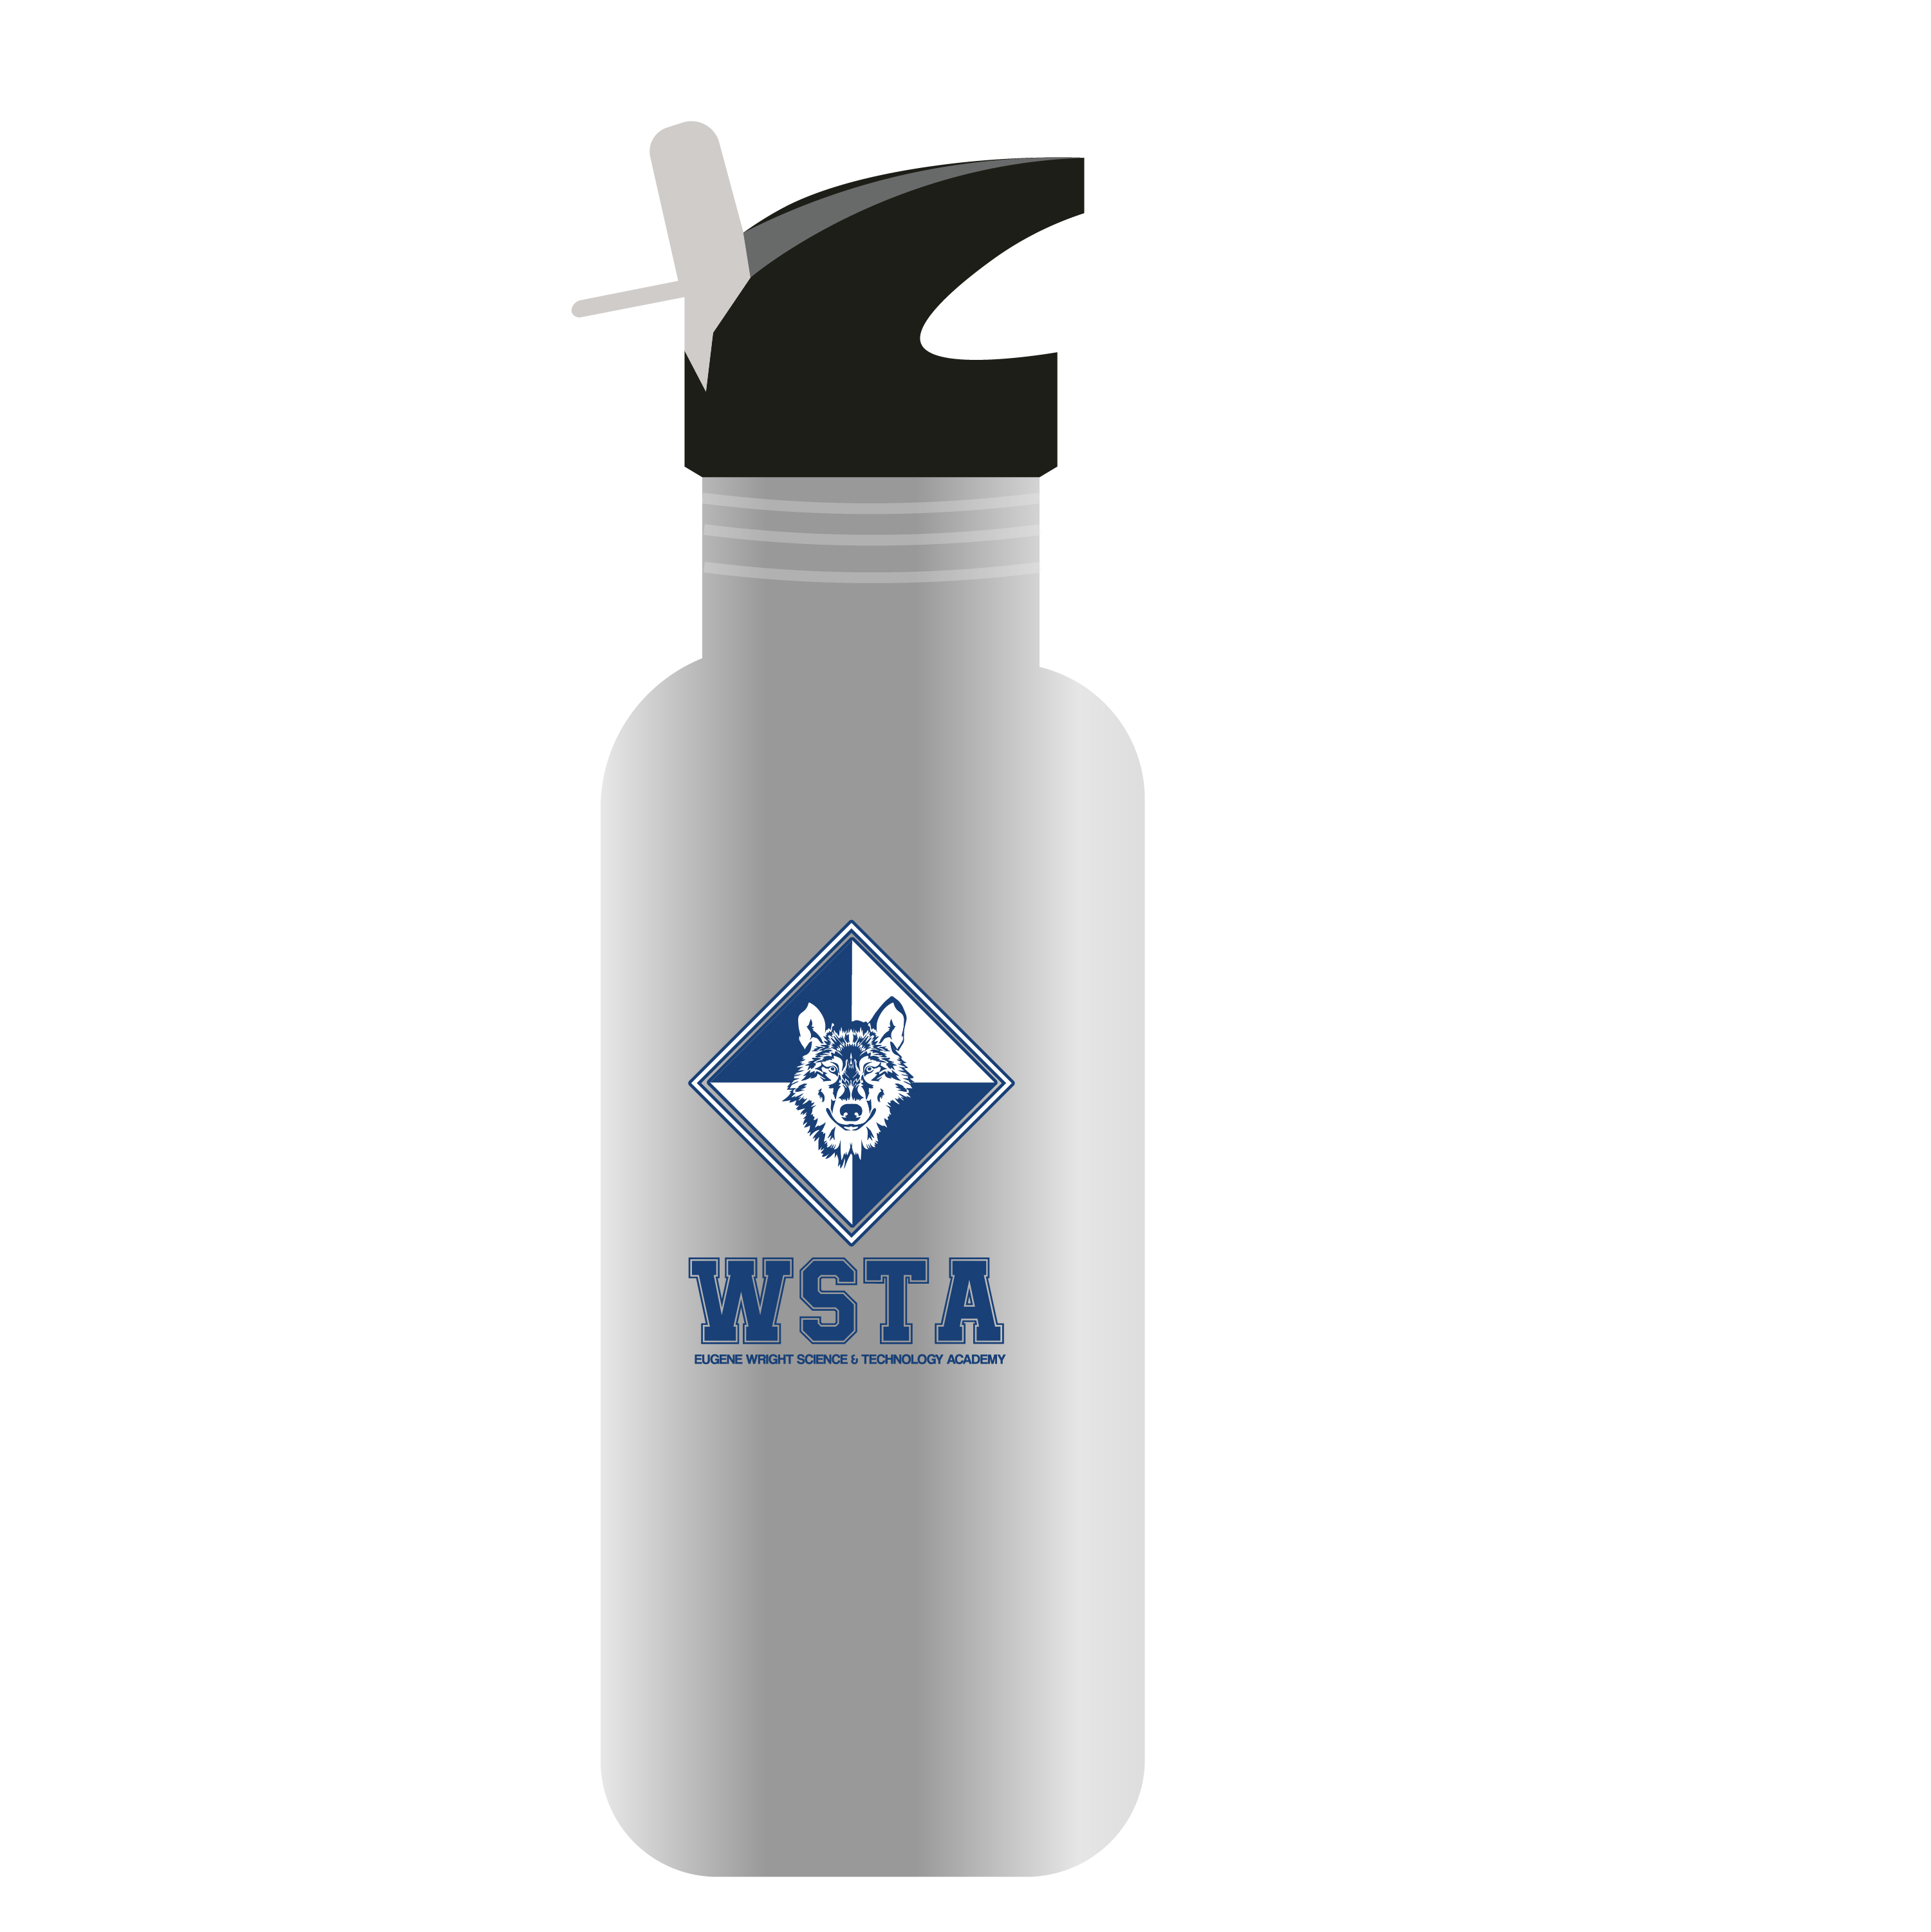 Wright Science & Technology Academy STAINLESS STEEL WATER BOTTLE STEM/STRAW TOP